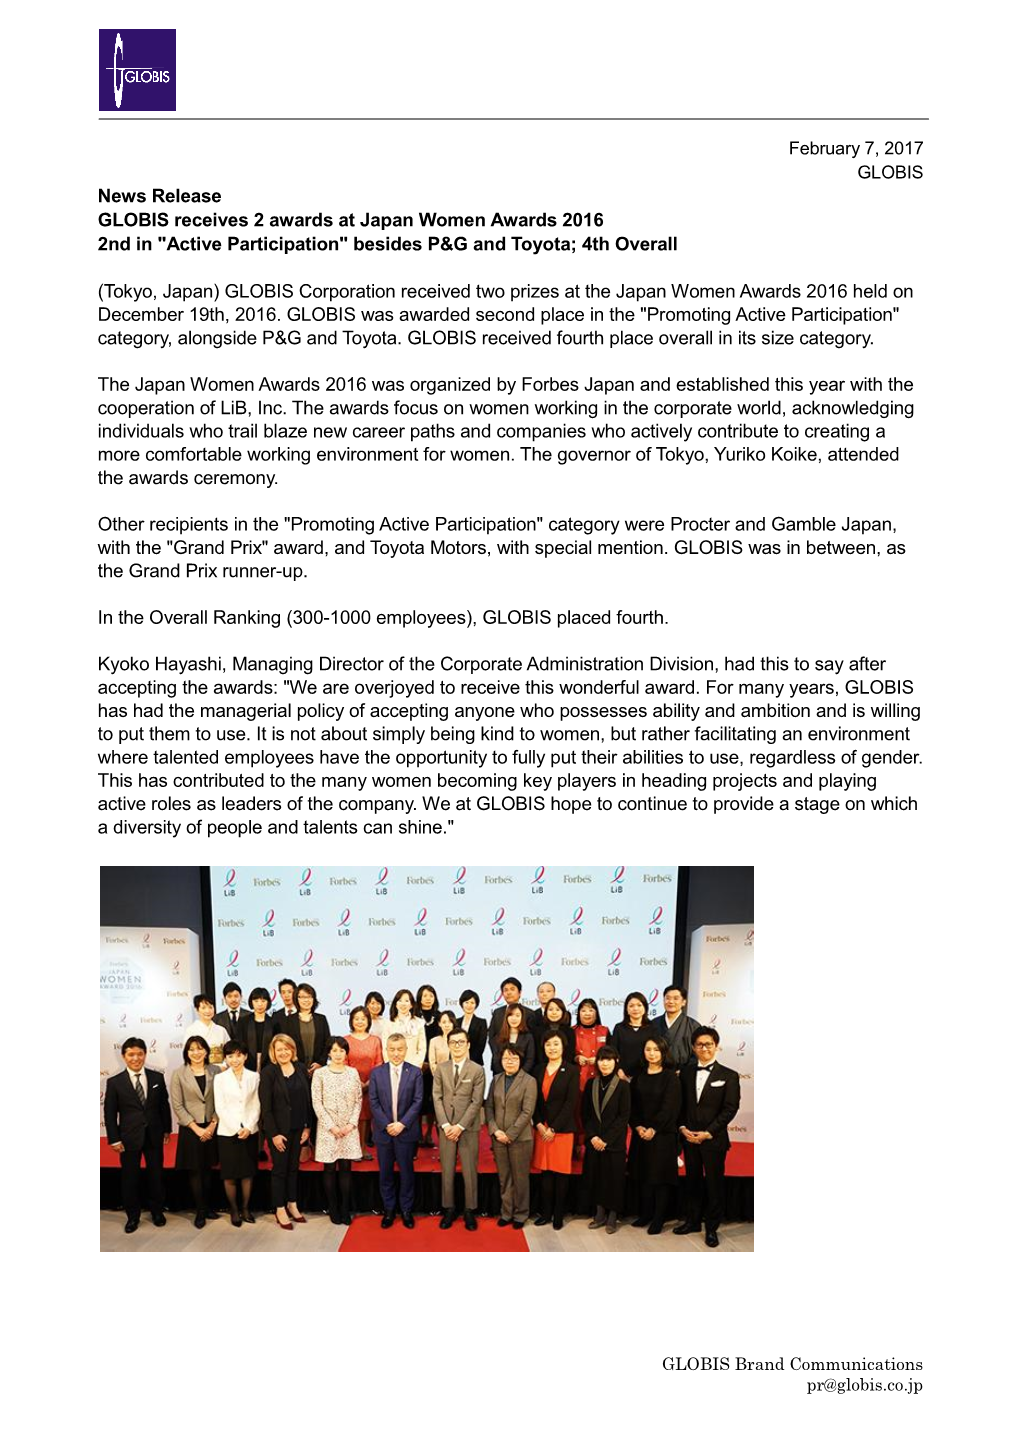 News Release GLOBIS Receives 2 Awards at Japan Women Awards 2016 2Nd in "Active Participation" Besides P&G and Toyota; 4Th Overall